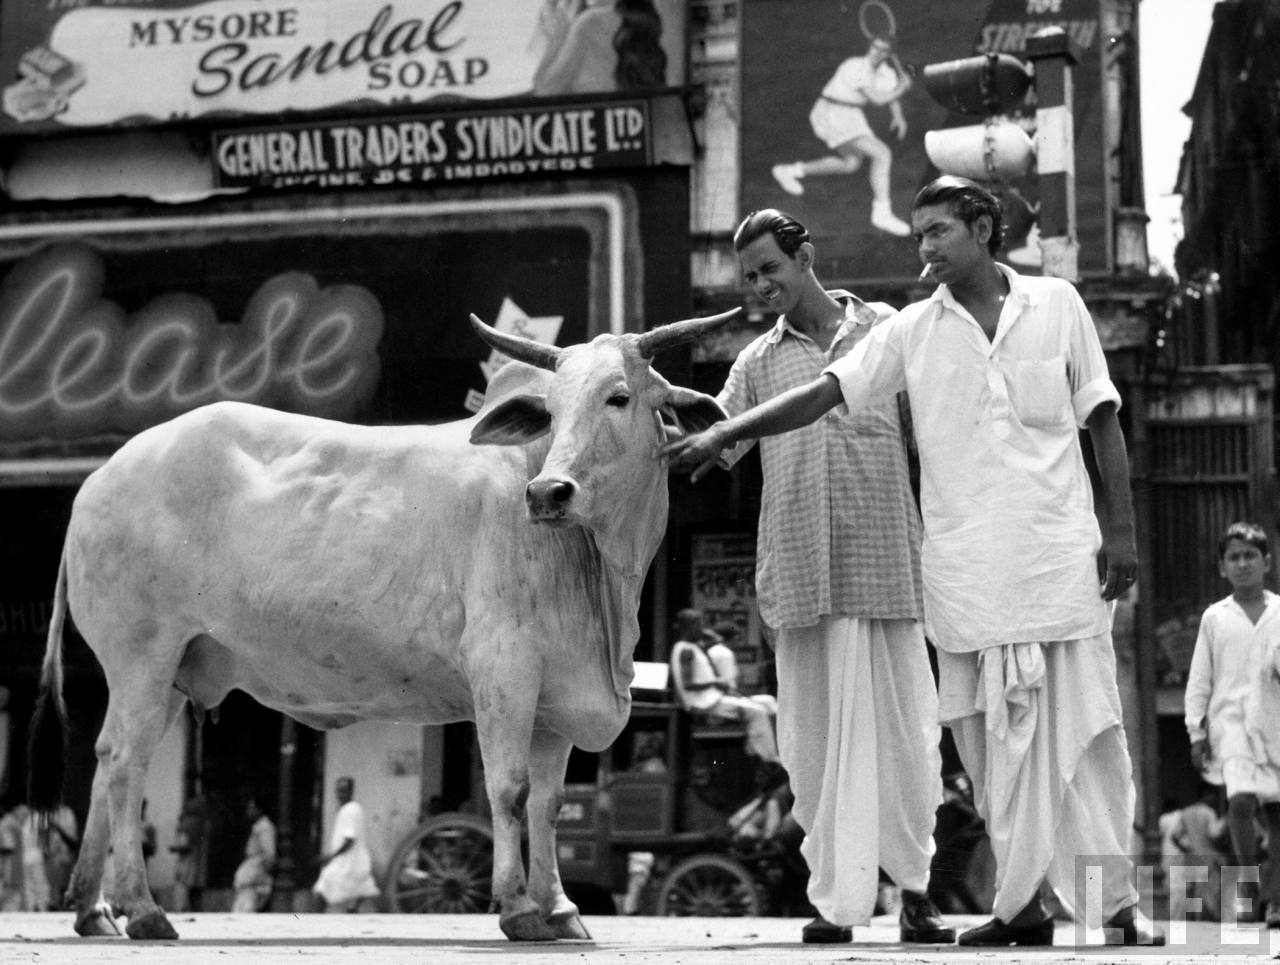 Two men touching a cow on a busy city street - 1946